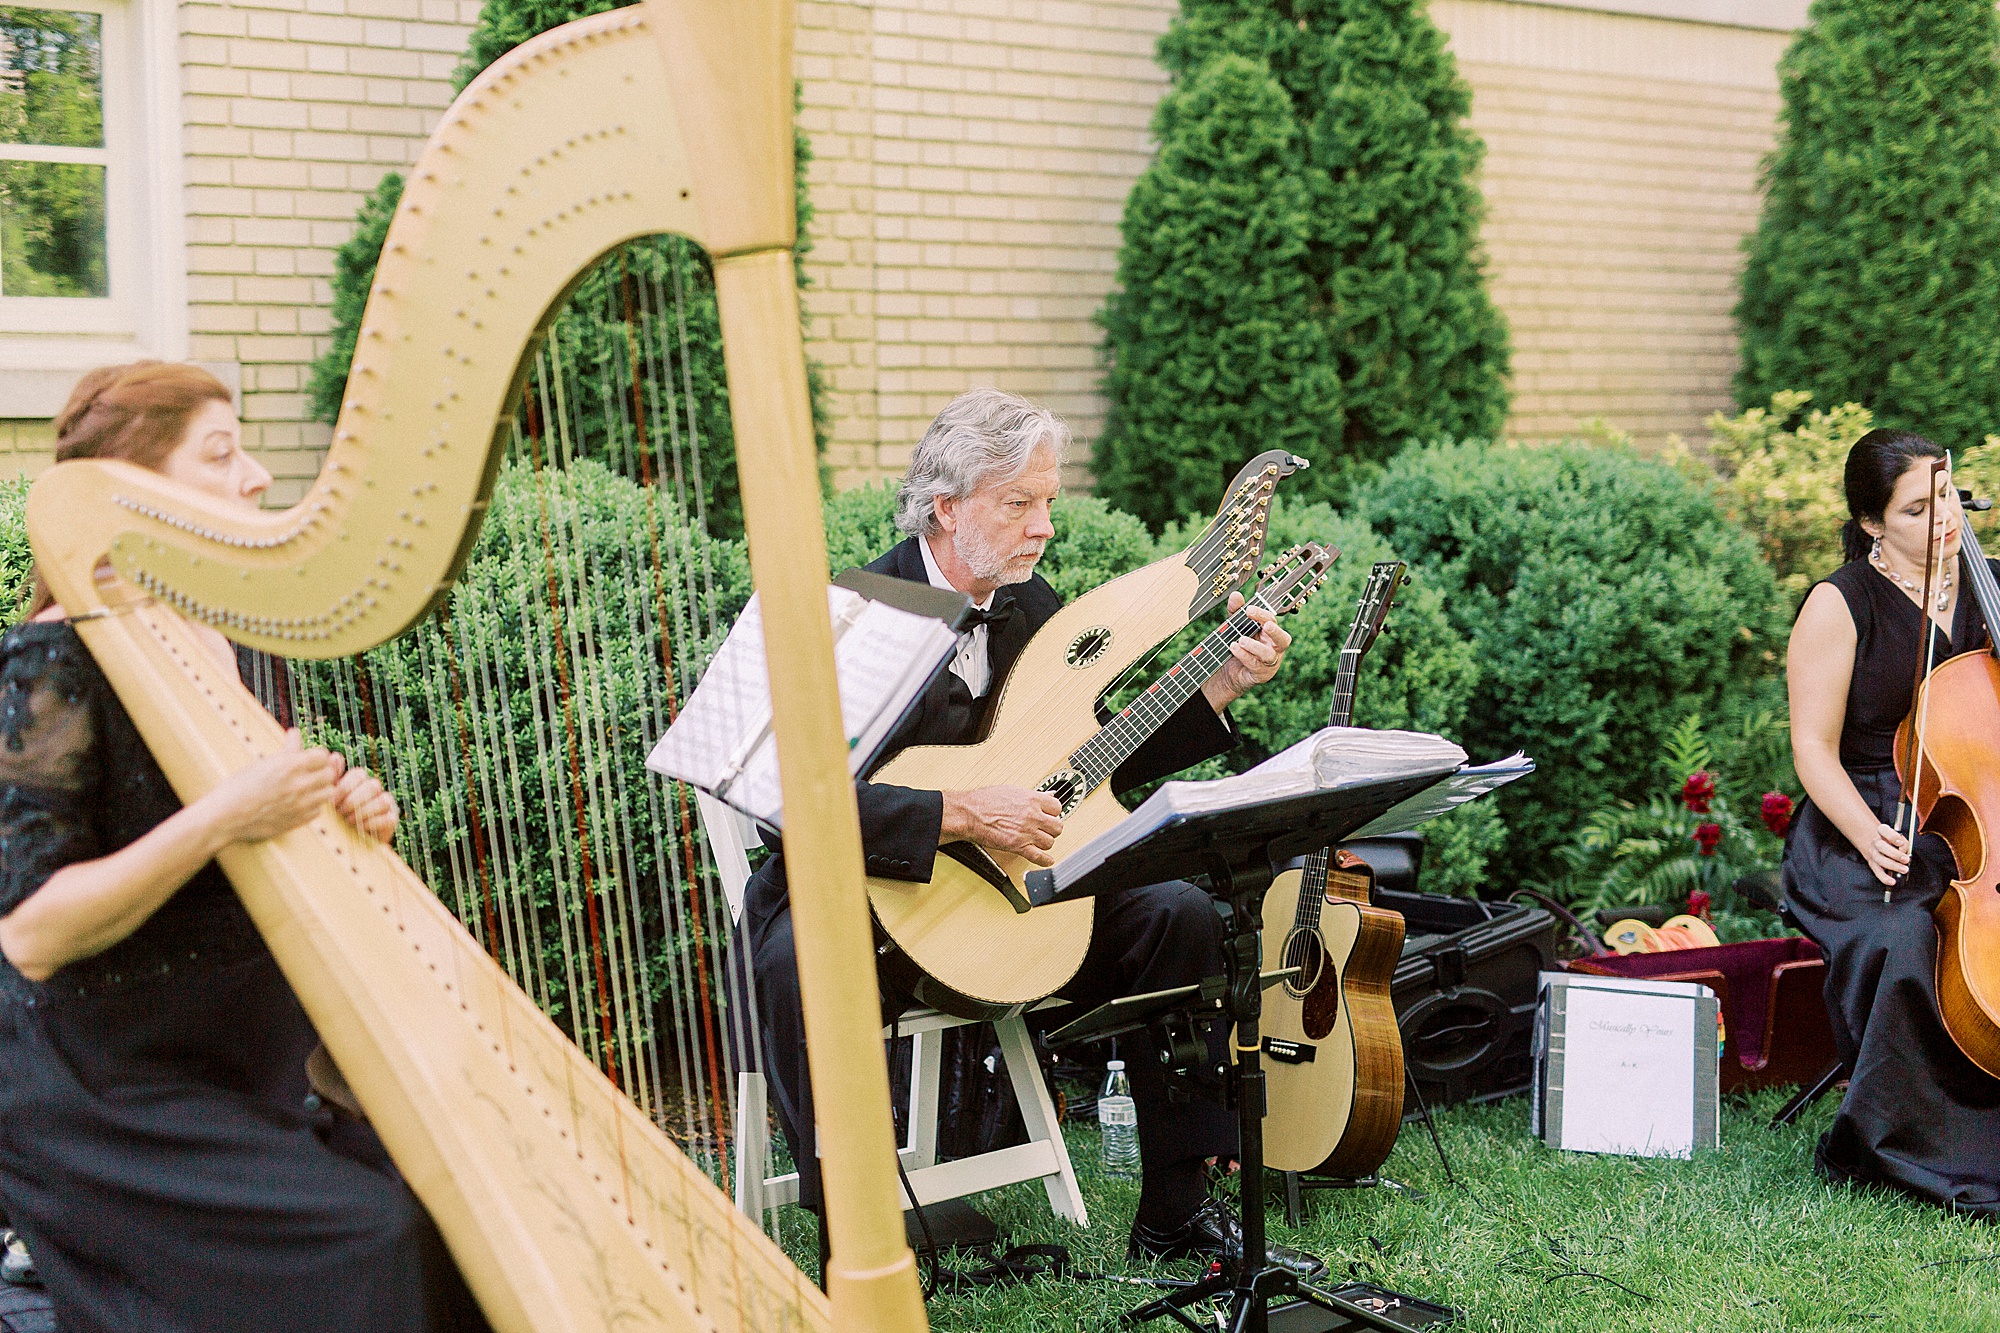 musicians play during outdoor wedding ceremony at Separk Mansion